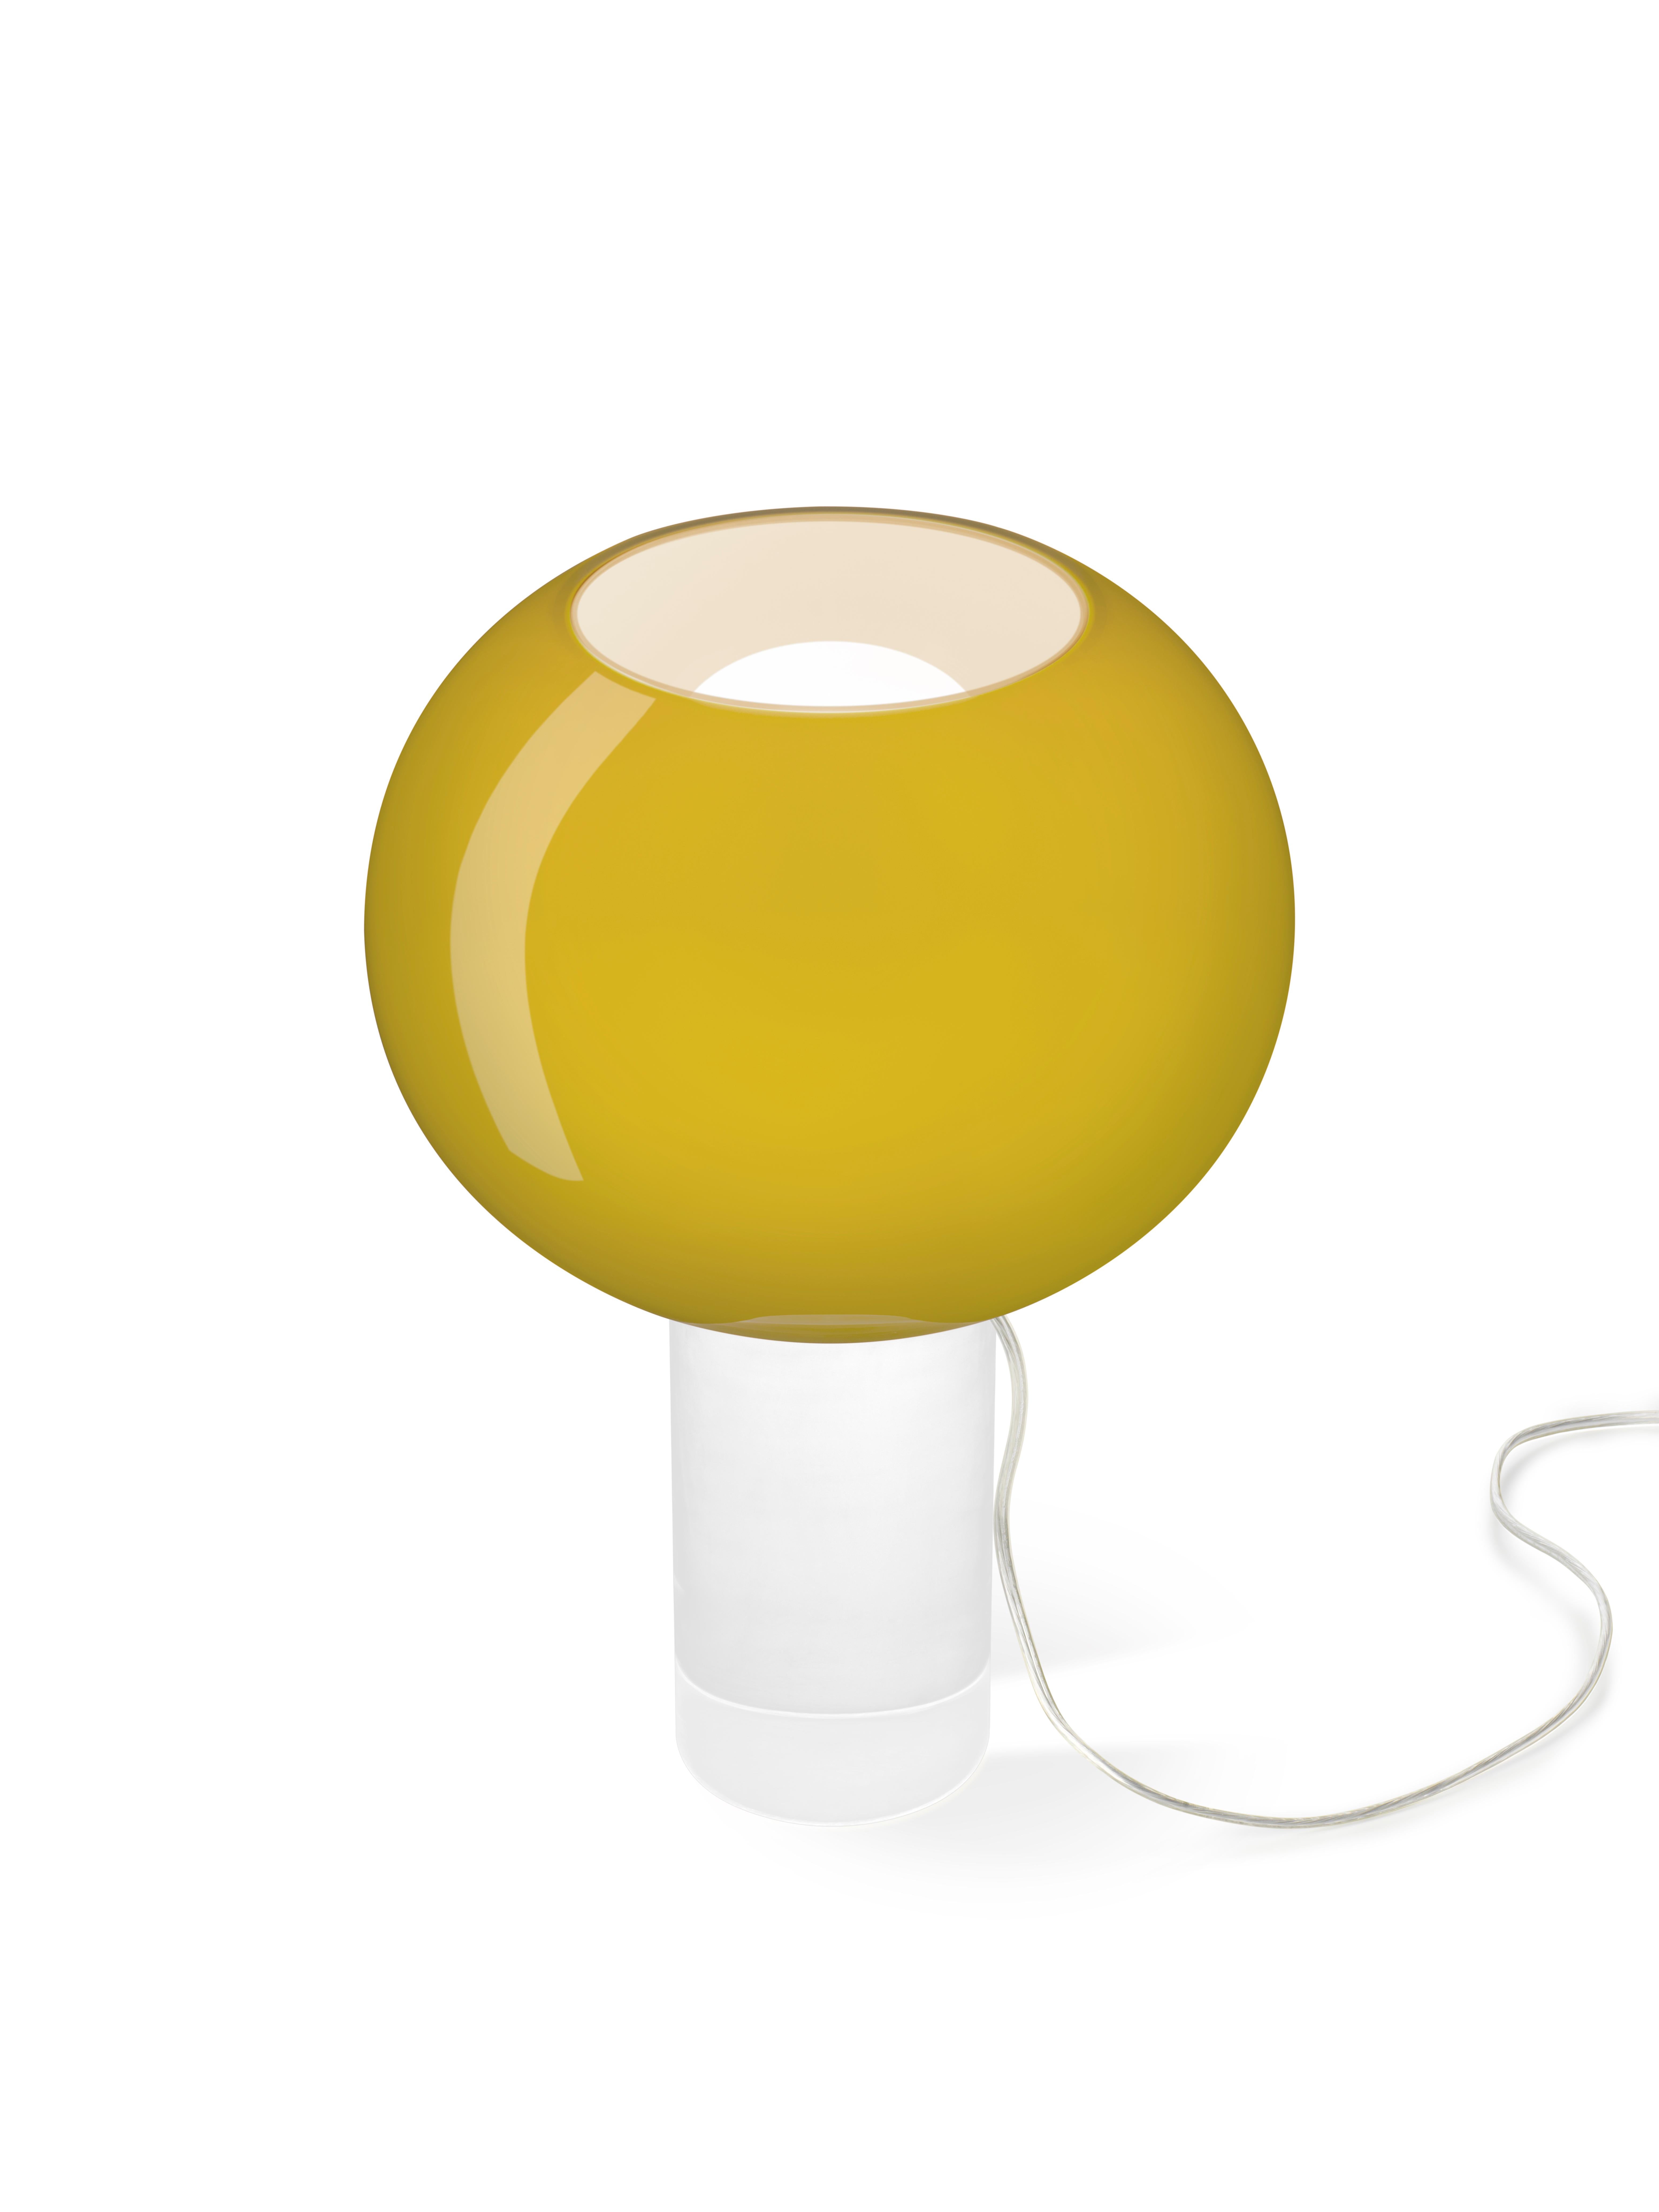 Foscarini Buds 3 Table Lamp by Rodolfo Dordoni In New Condition For Sale In Brooklyn, NY